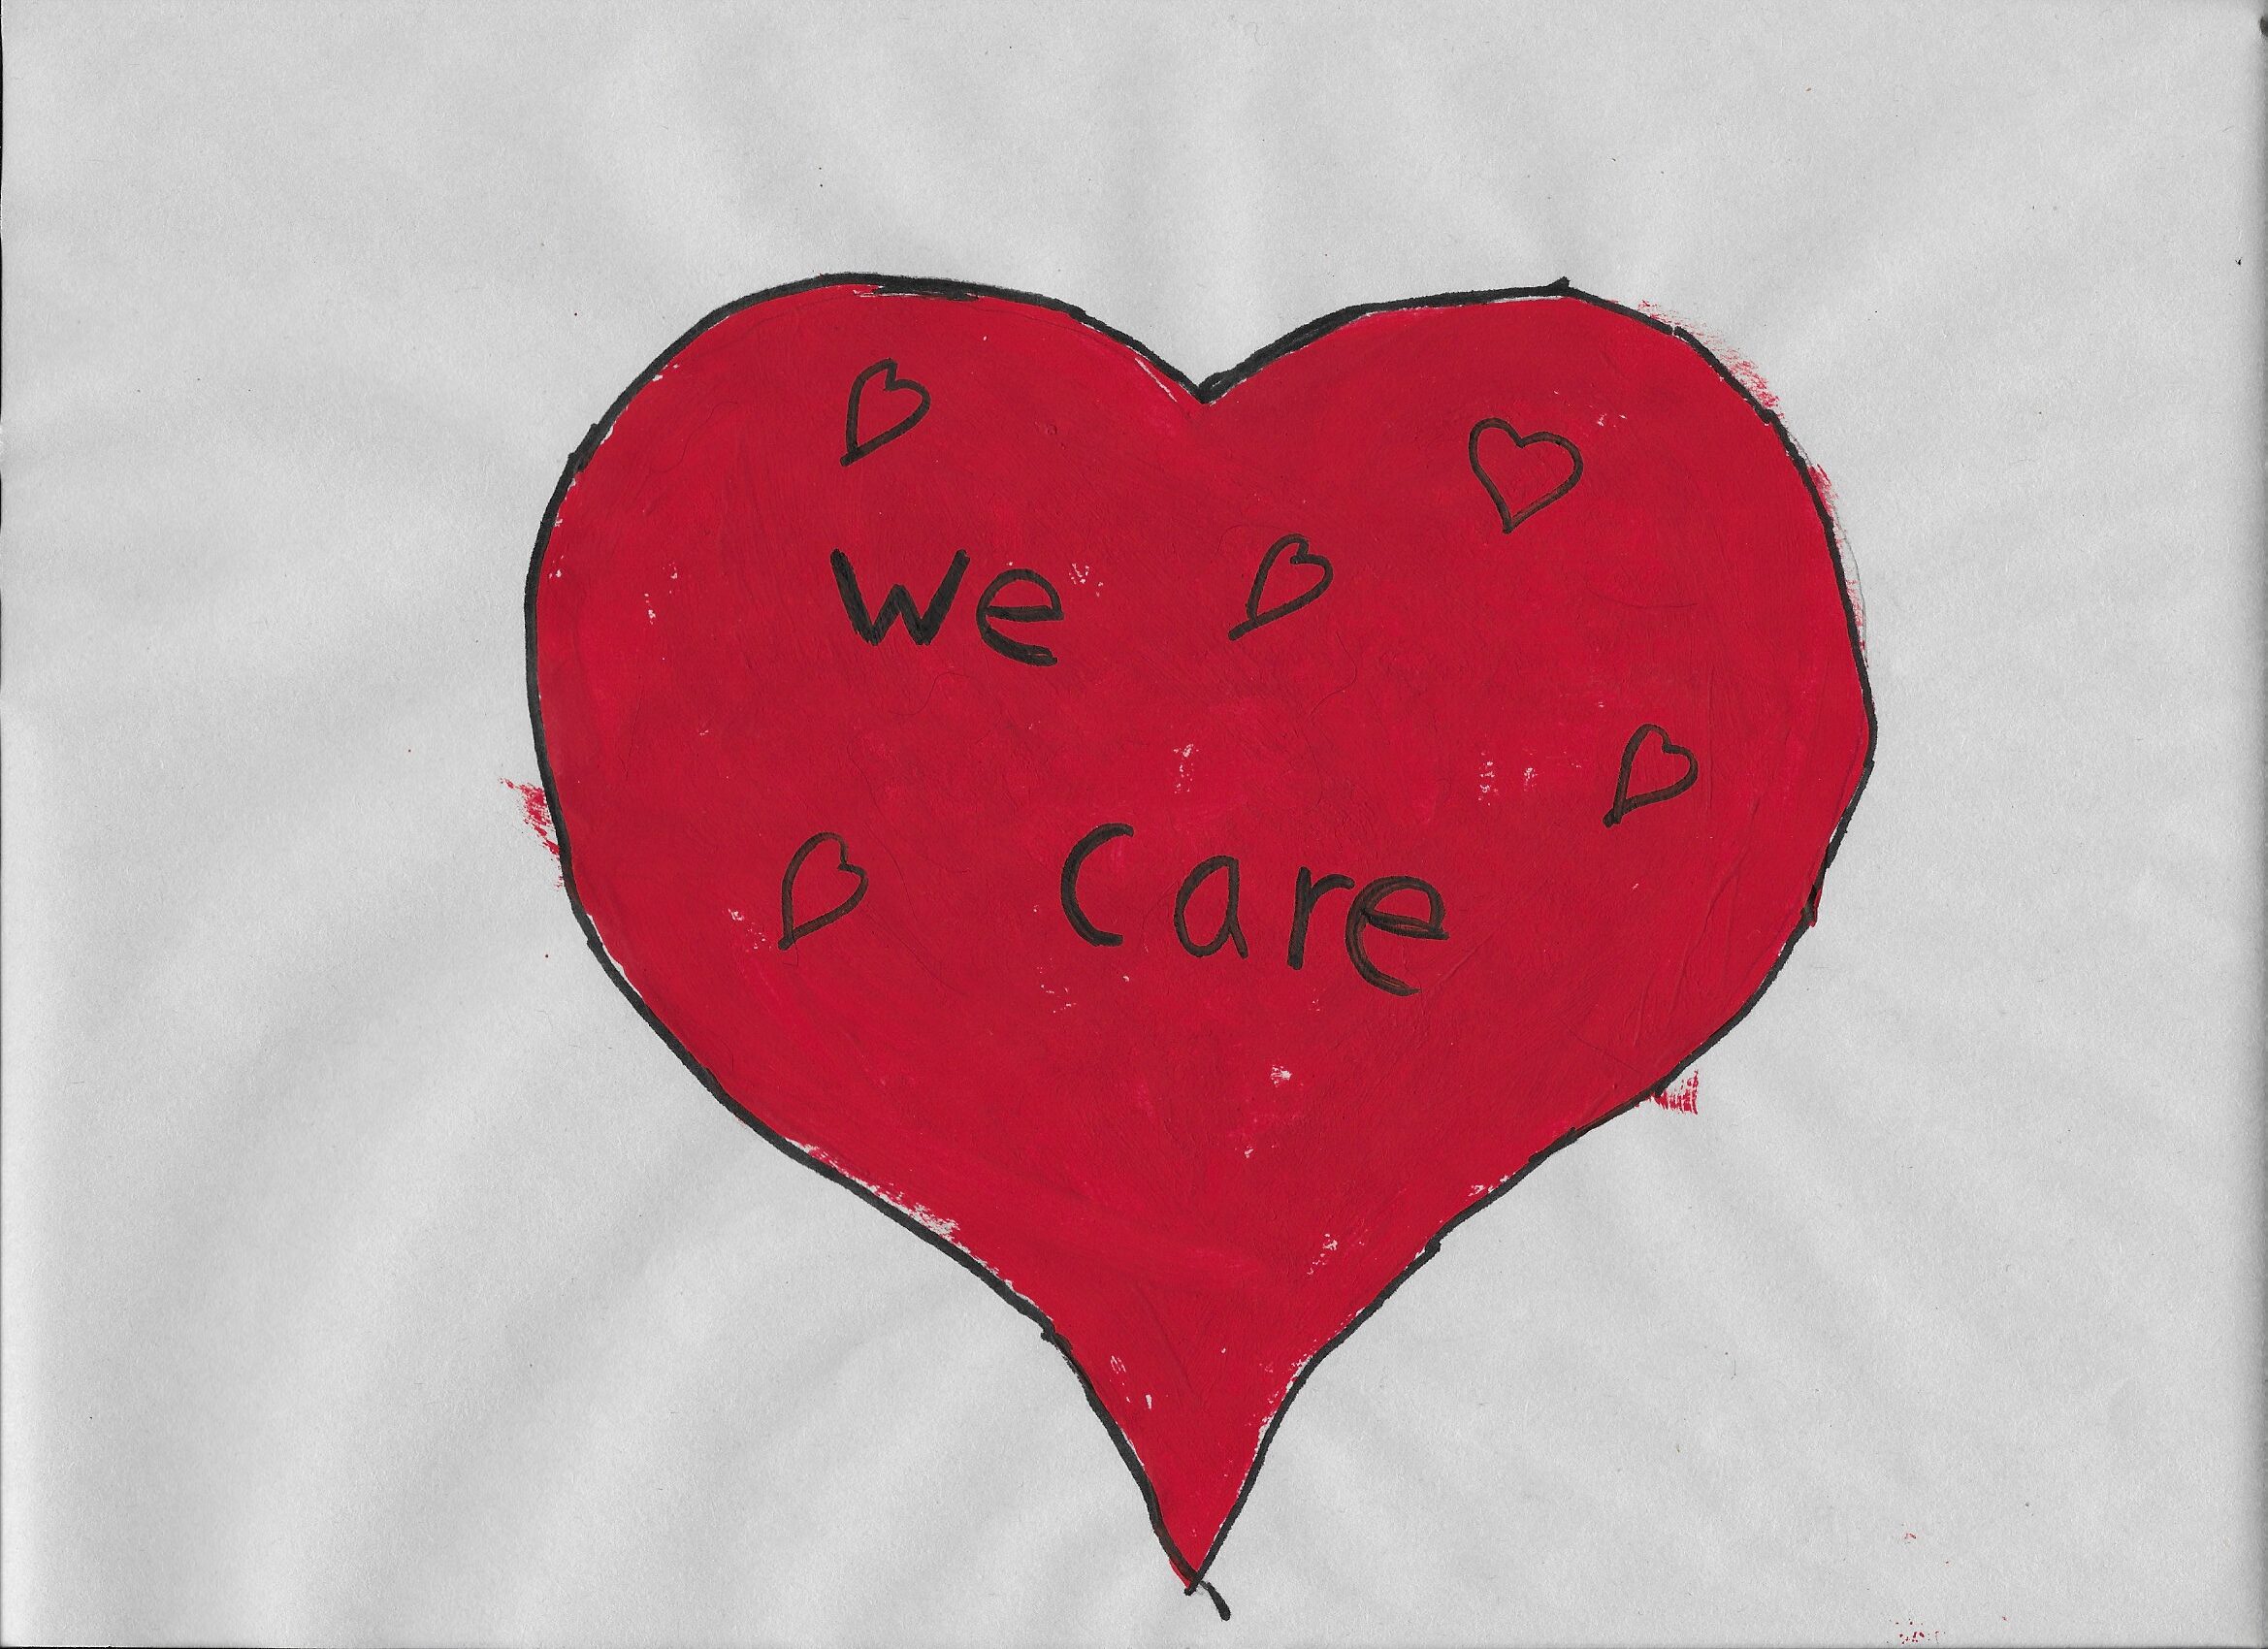 A heart drawn and painted by my niece with "We Care" written in the middle.